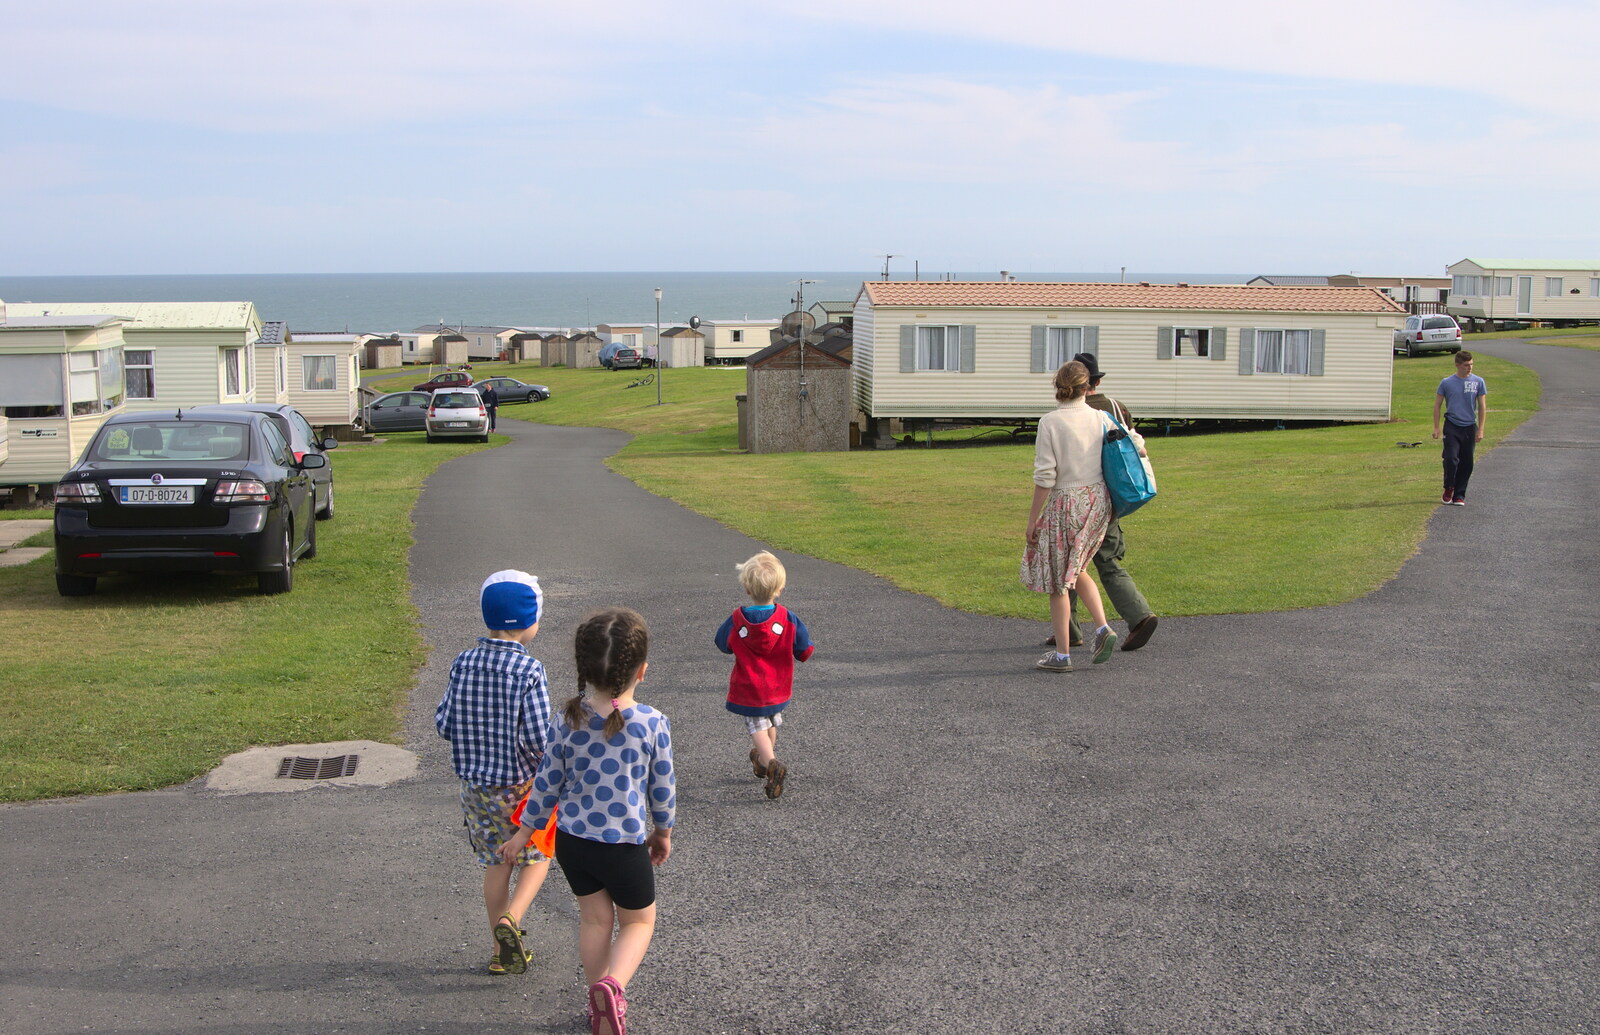 We head to the beach through the campsite from Camping at Silver Strand, Wicklow, County Wicklow, Ireland - 7th August 2014